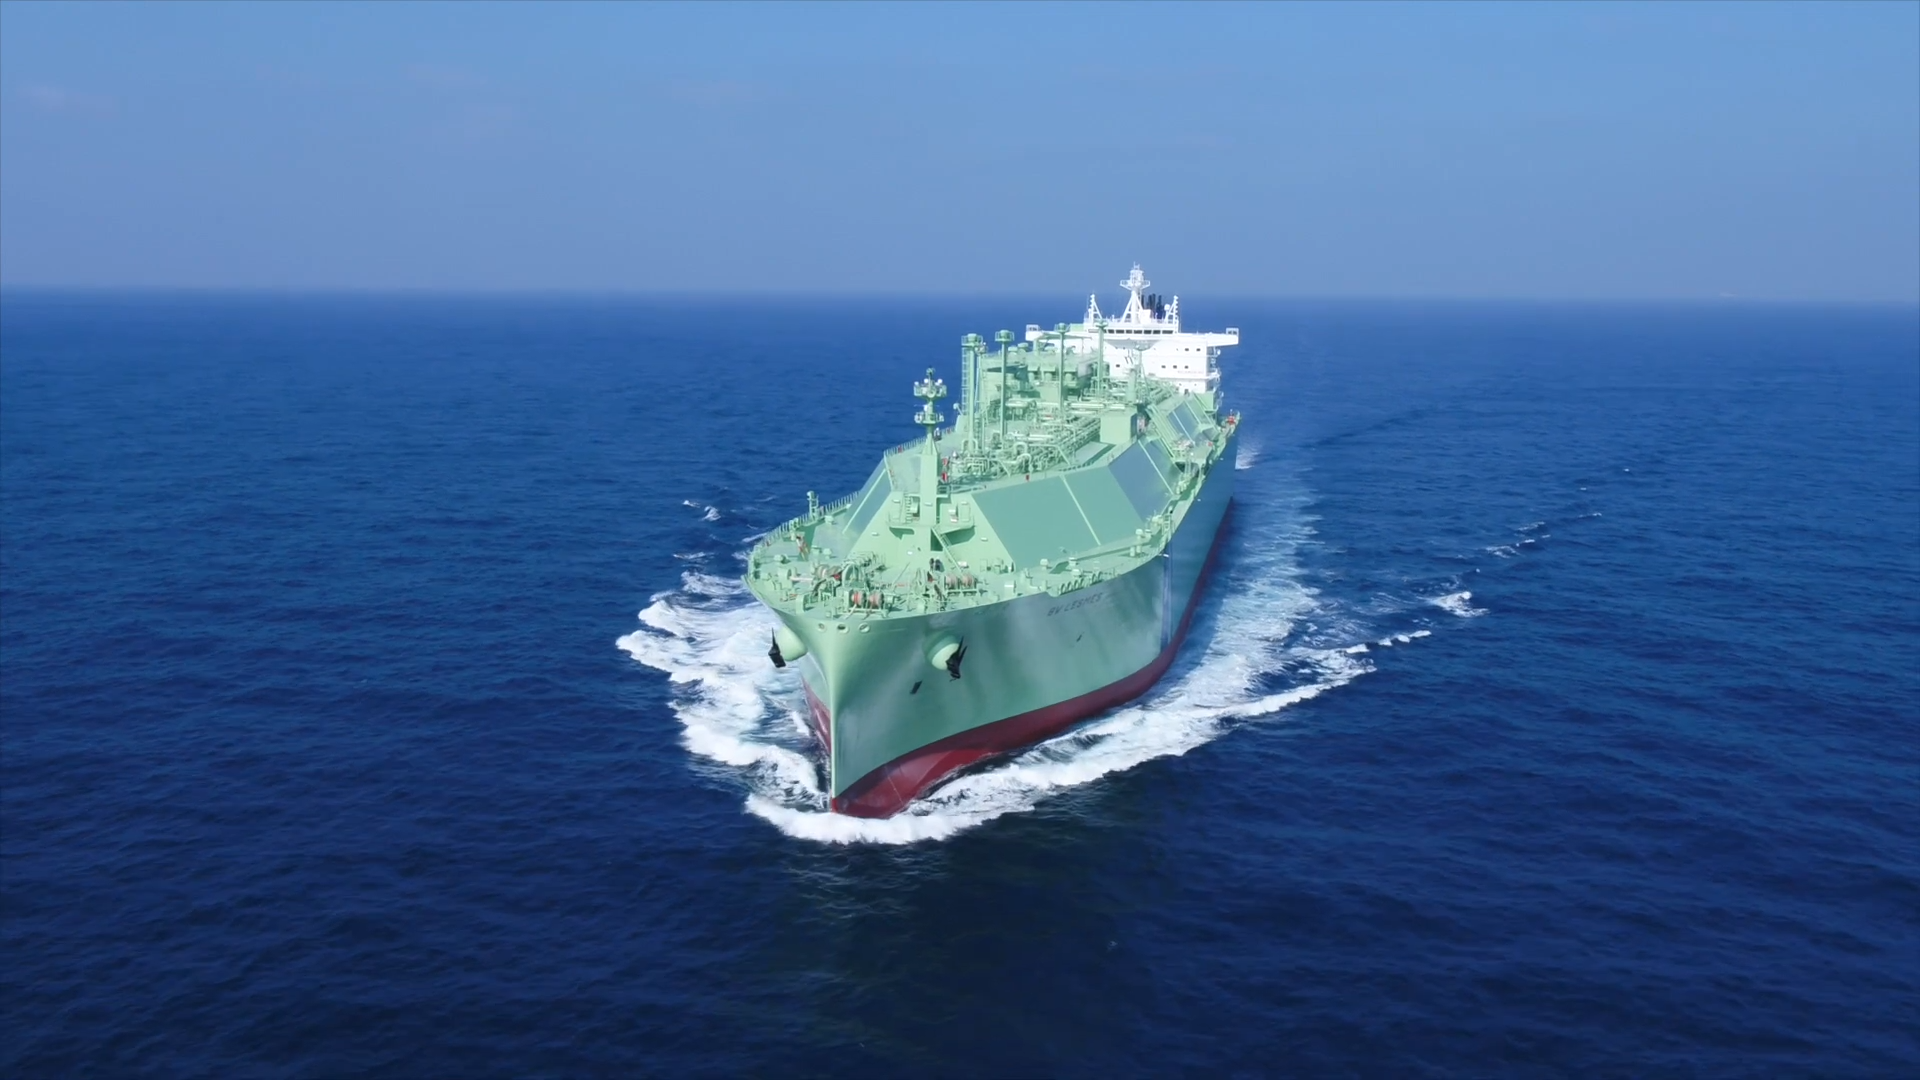 BW assessing condition of its LNG carrier after Suez Canal incident